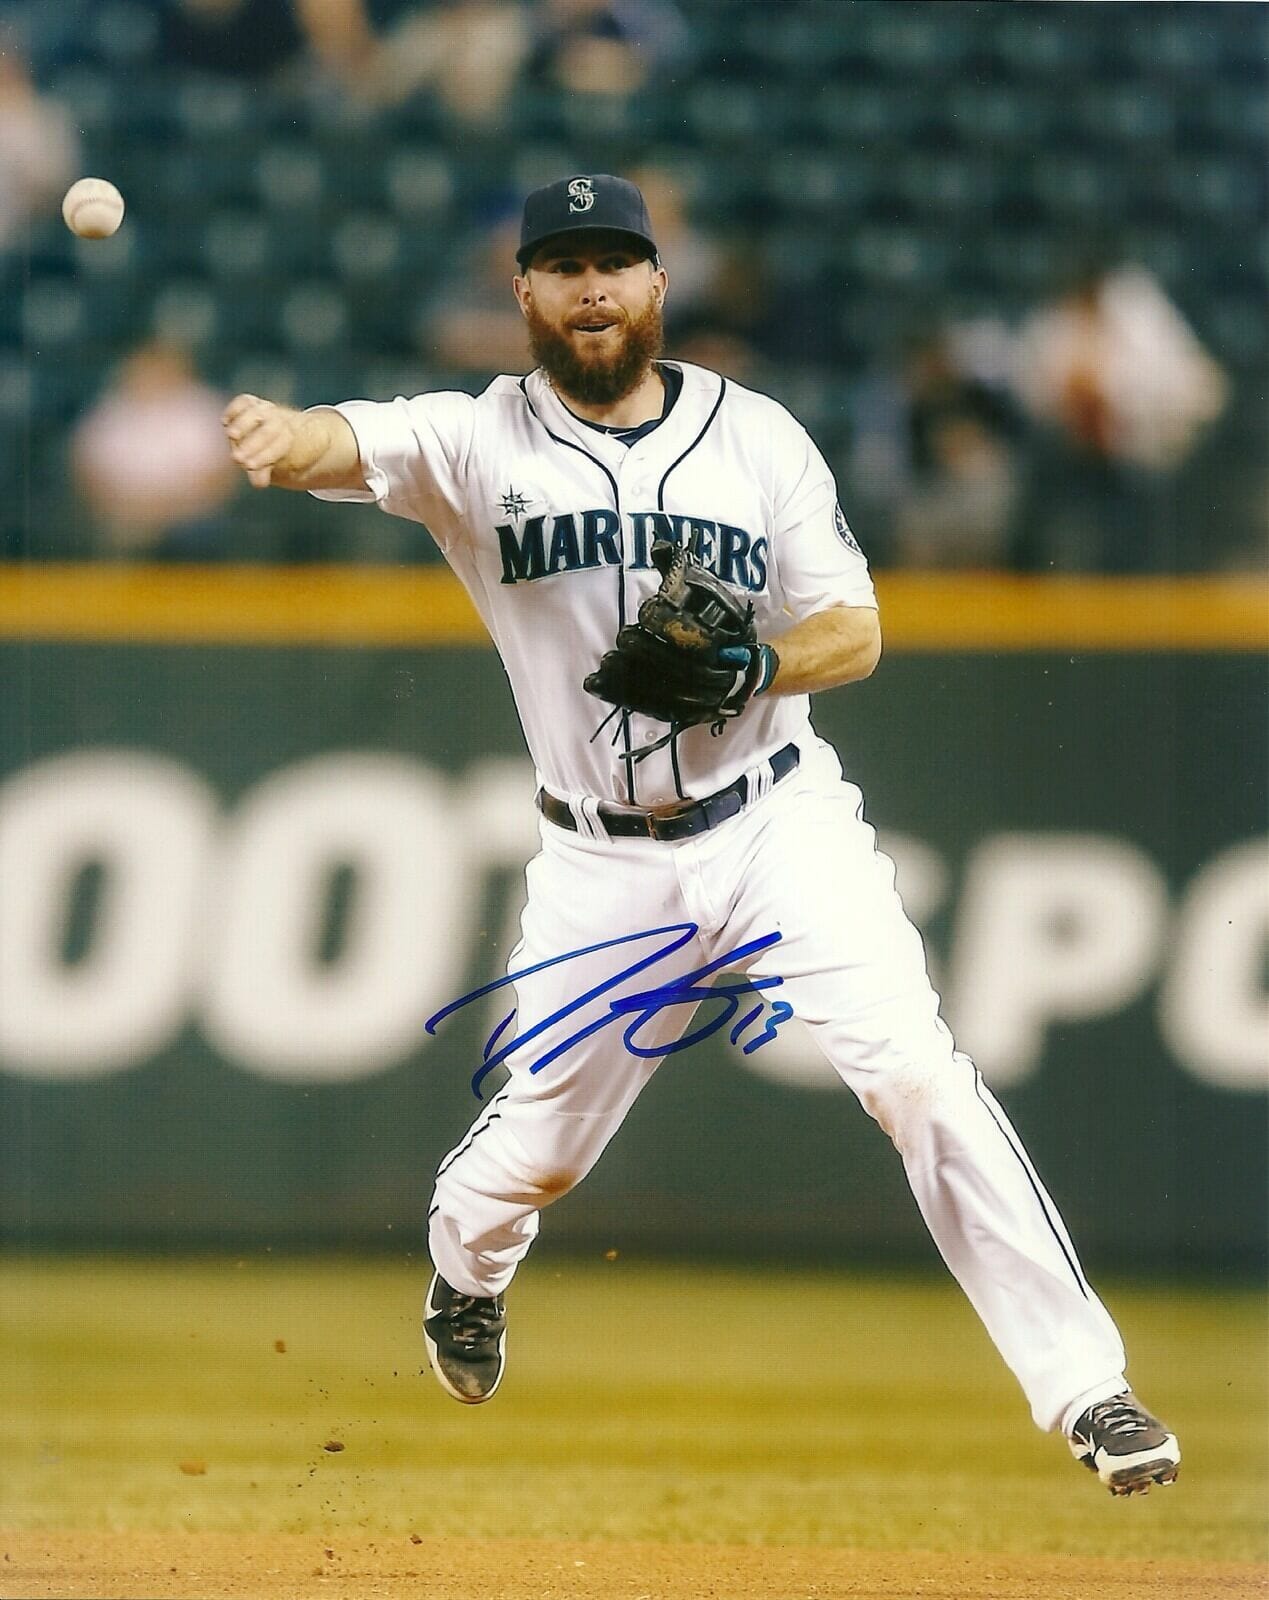 Dustin Ackley Signed Photograph - 8x10